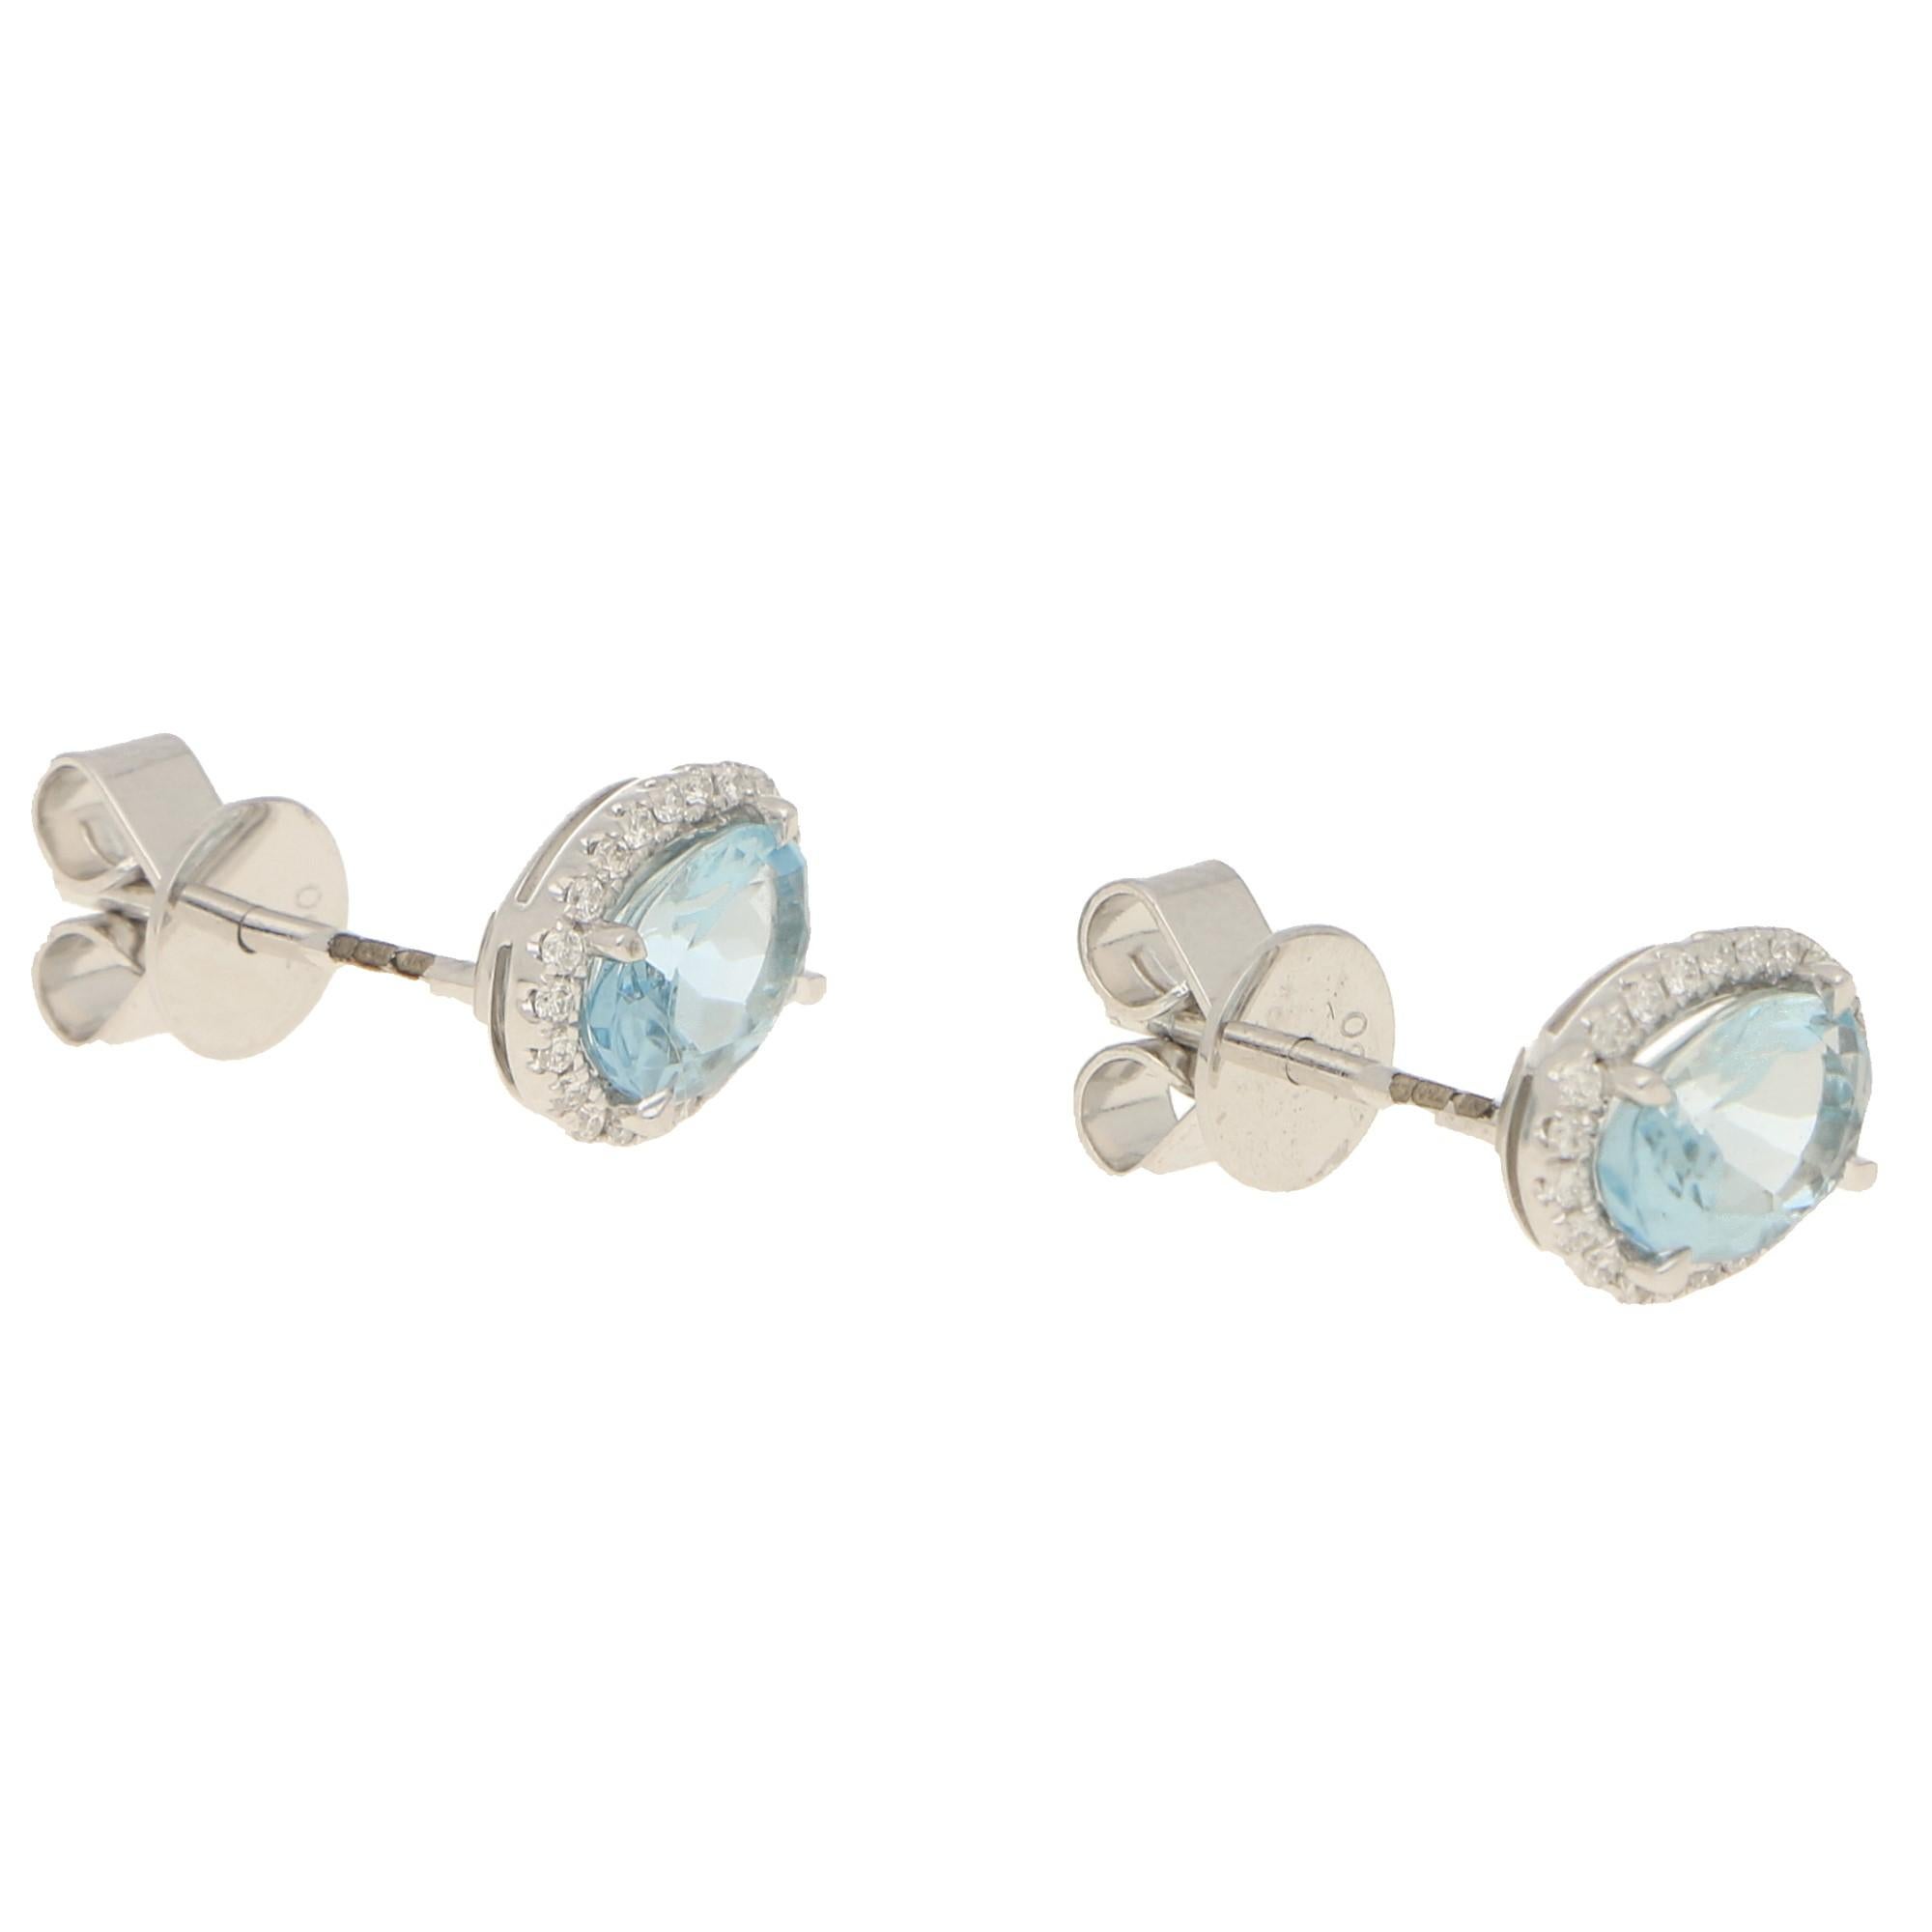 A beautiful pair of aquamarine and diamond cluster stud earrings set in 18k white gold! 

The earrings are prominently set with oval shaped aquamarines which are subtly four claw set to the centre.  There is a total aquamarine weight of 1.38 carats